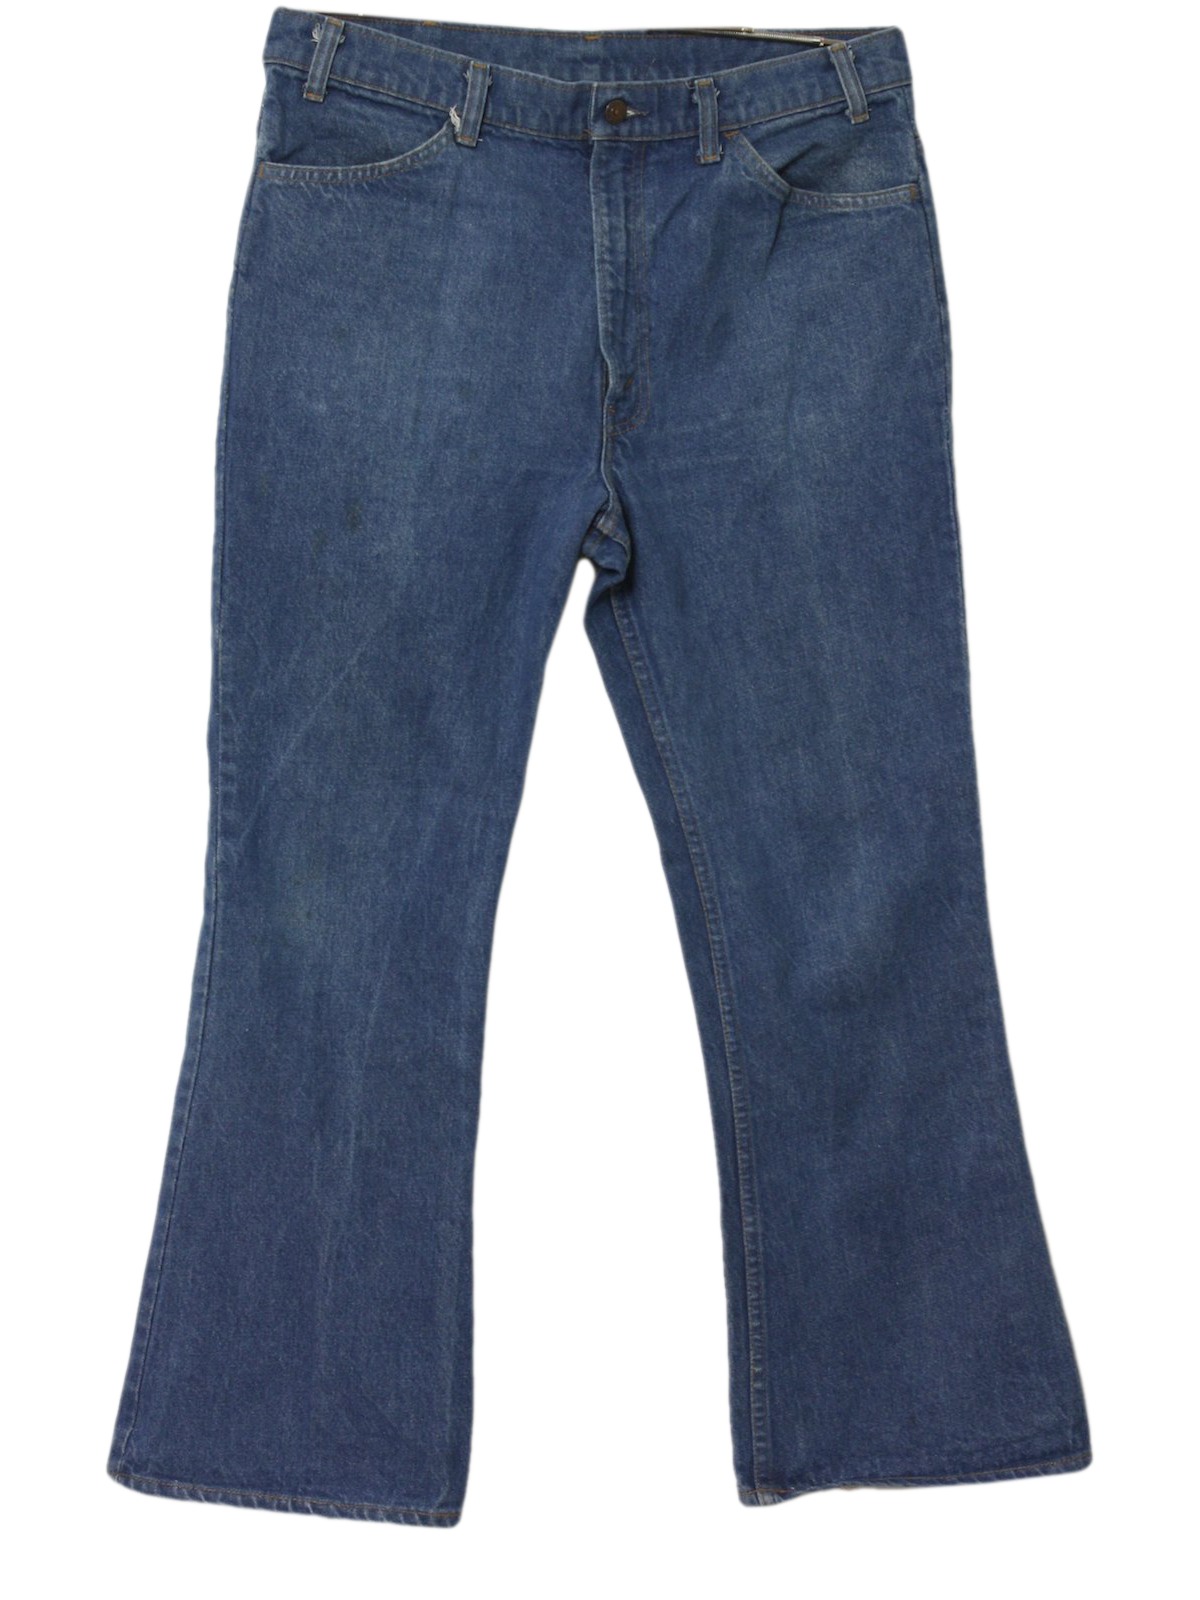 Vintage Levis Seventies Flared Pants / Flares: 70s -Levis- Mens well ...